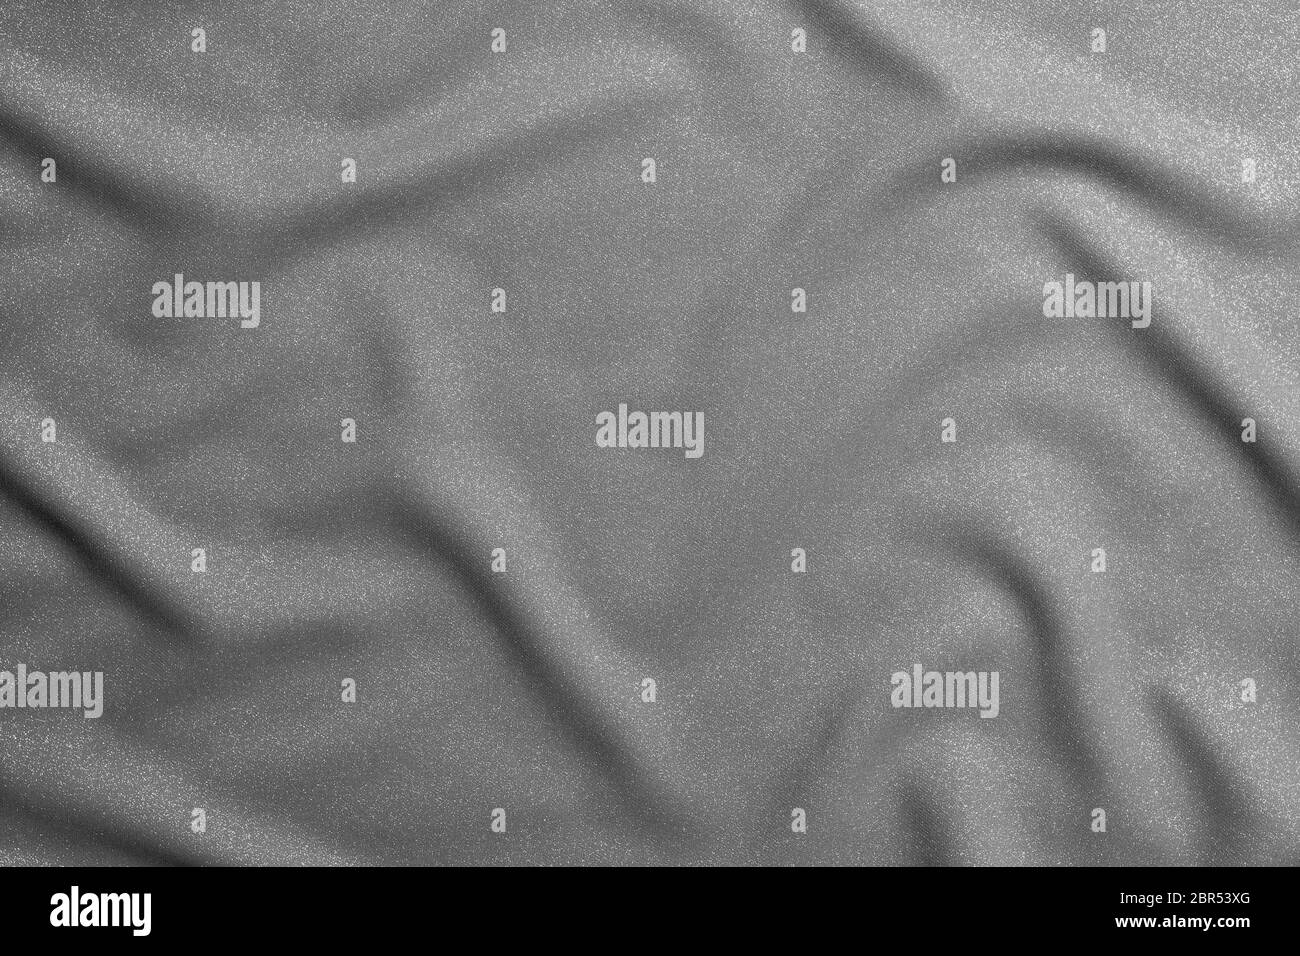 Black and white wavy silk fabric with folds. Mockup and blank designer for making a flag on a gray background texture. Stock Photo